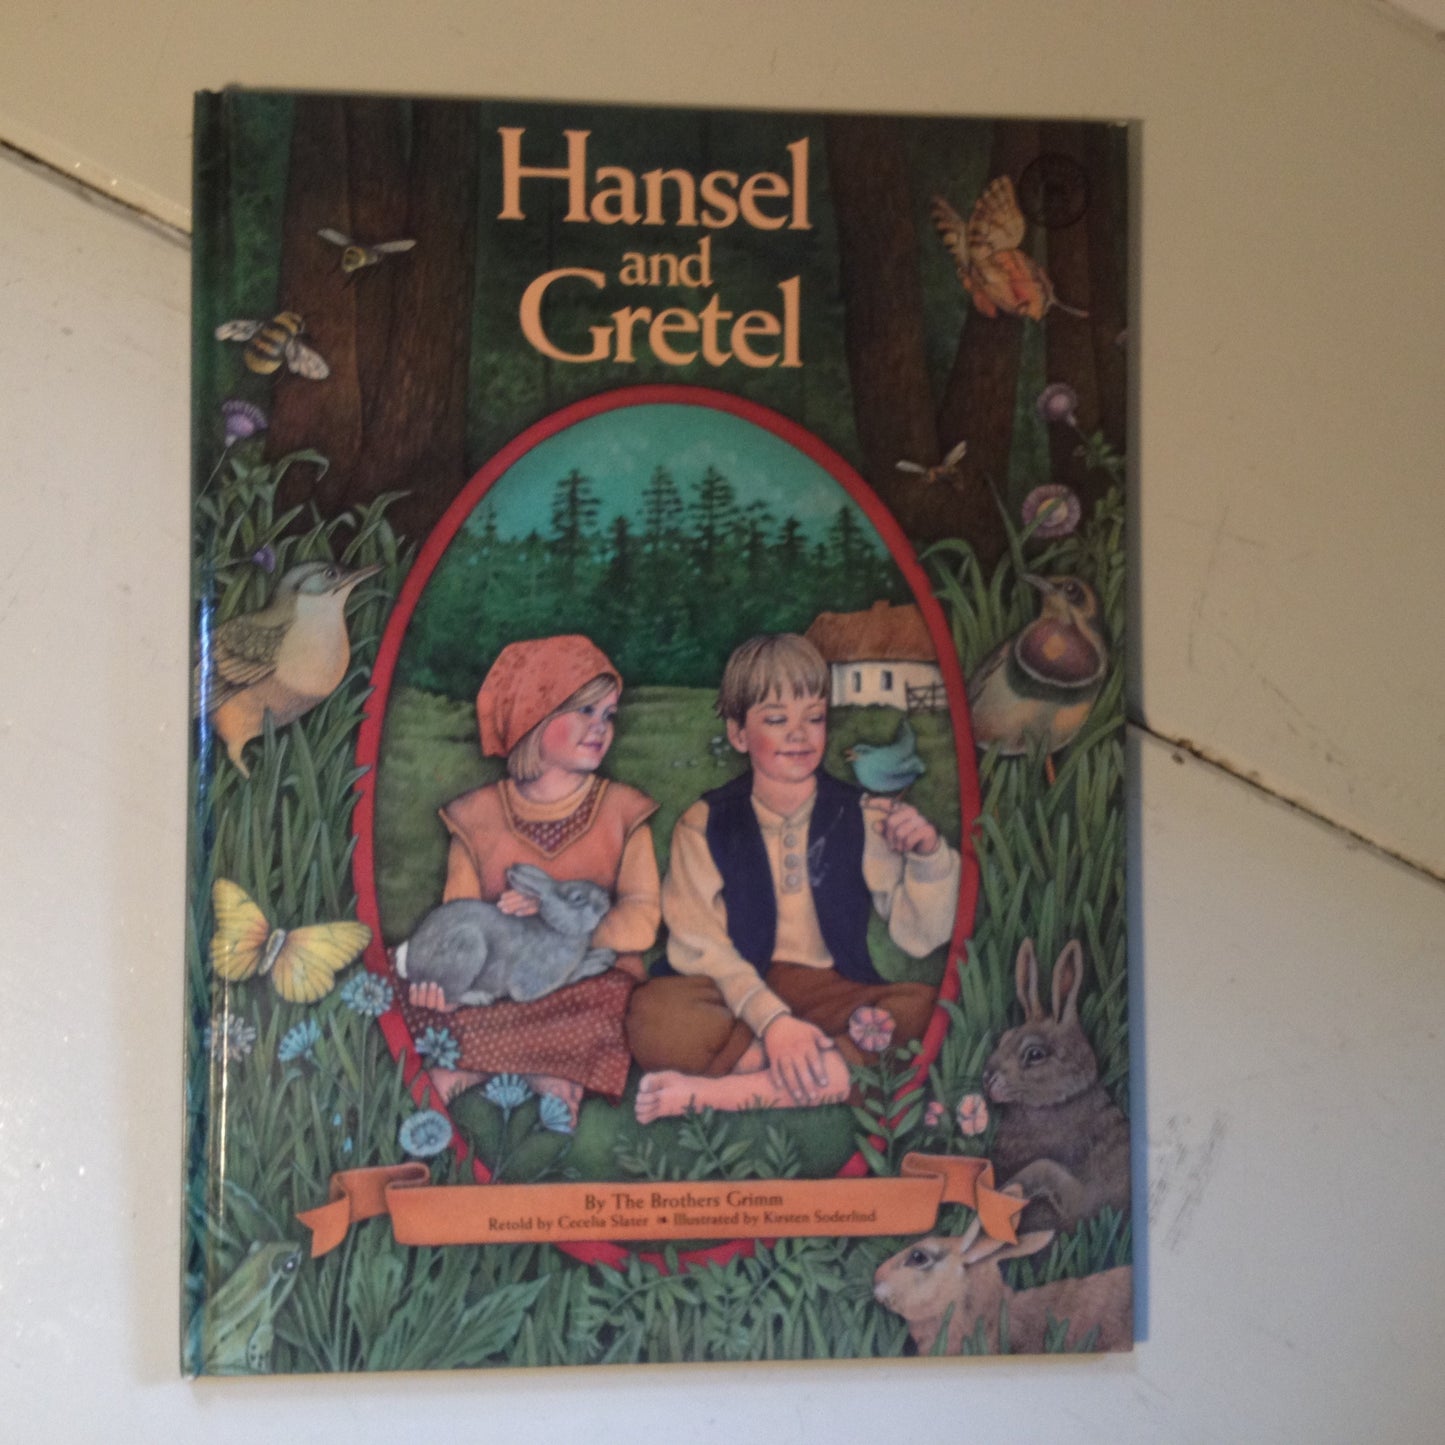 Hansel and Gretel by The Brothers Grimm Retold by Cecelia Slater